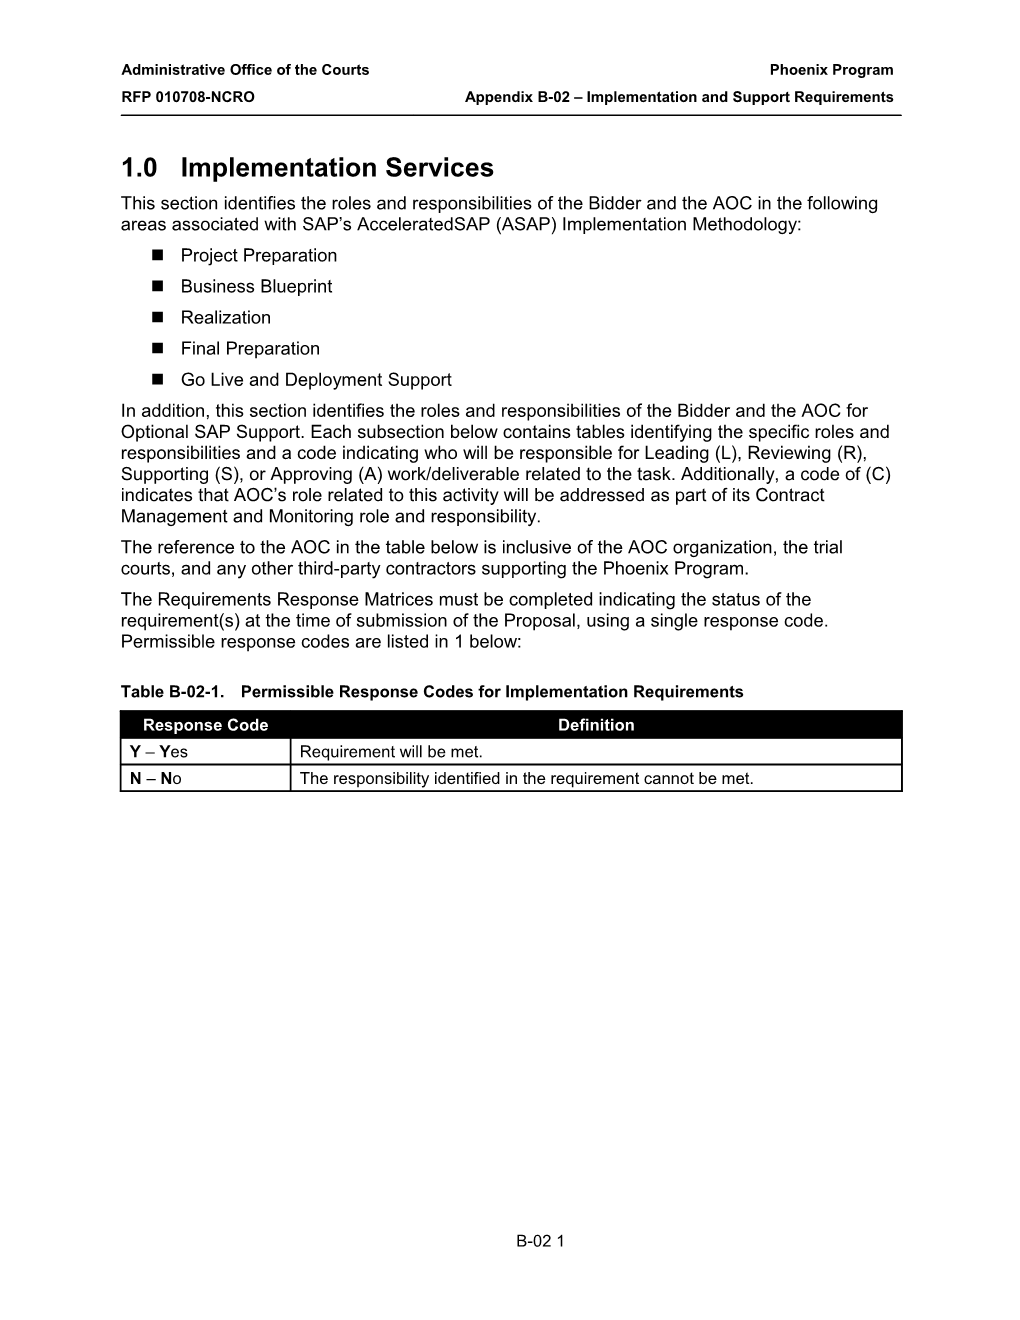 Appendix B-02 Implementation and Support Requirements